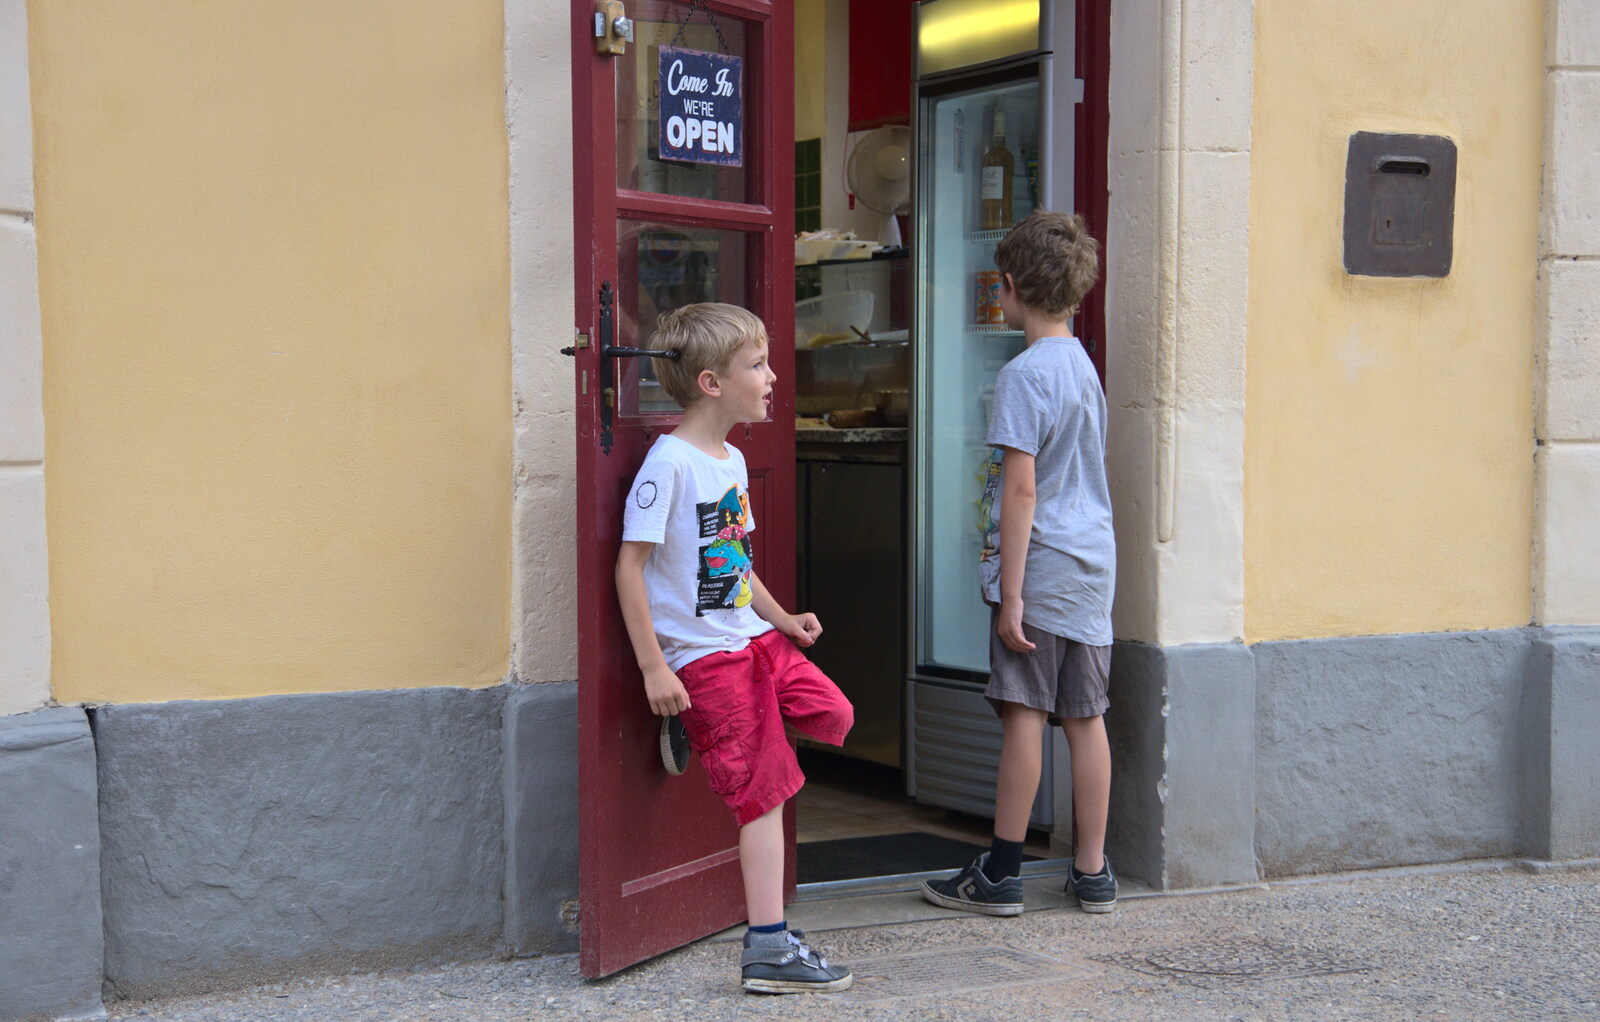 The boys hang around outside the pizza shack from A Trip to Carcassonne, Aude, France - 8th August 2018